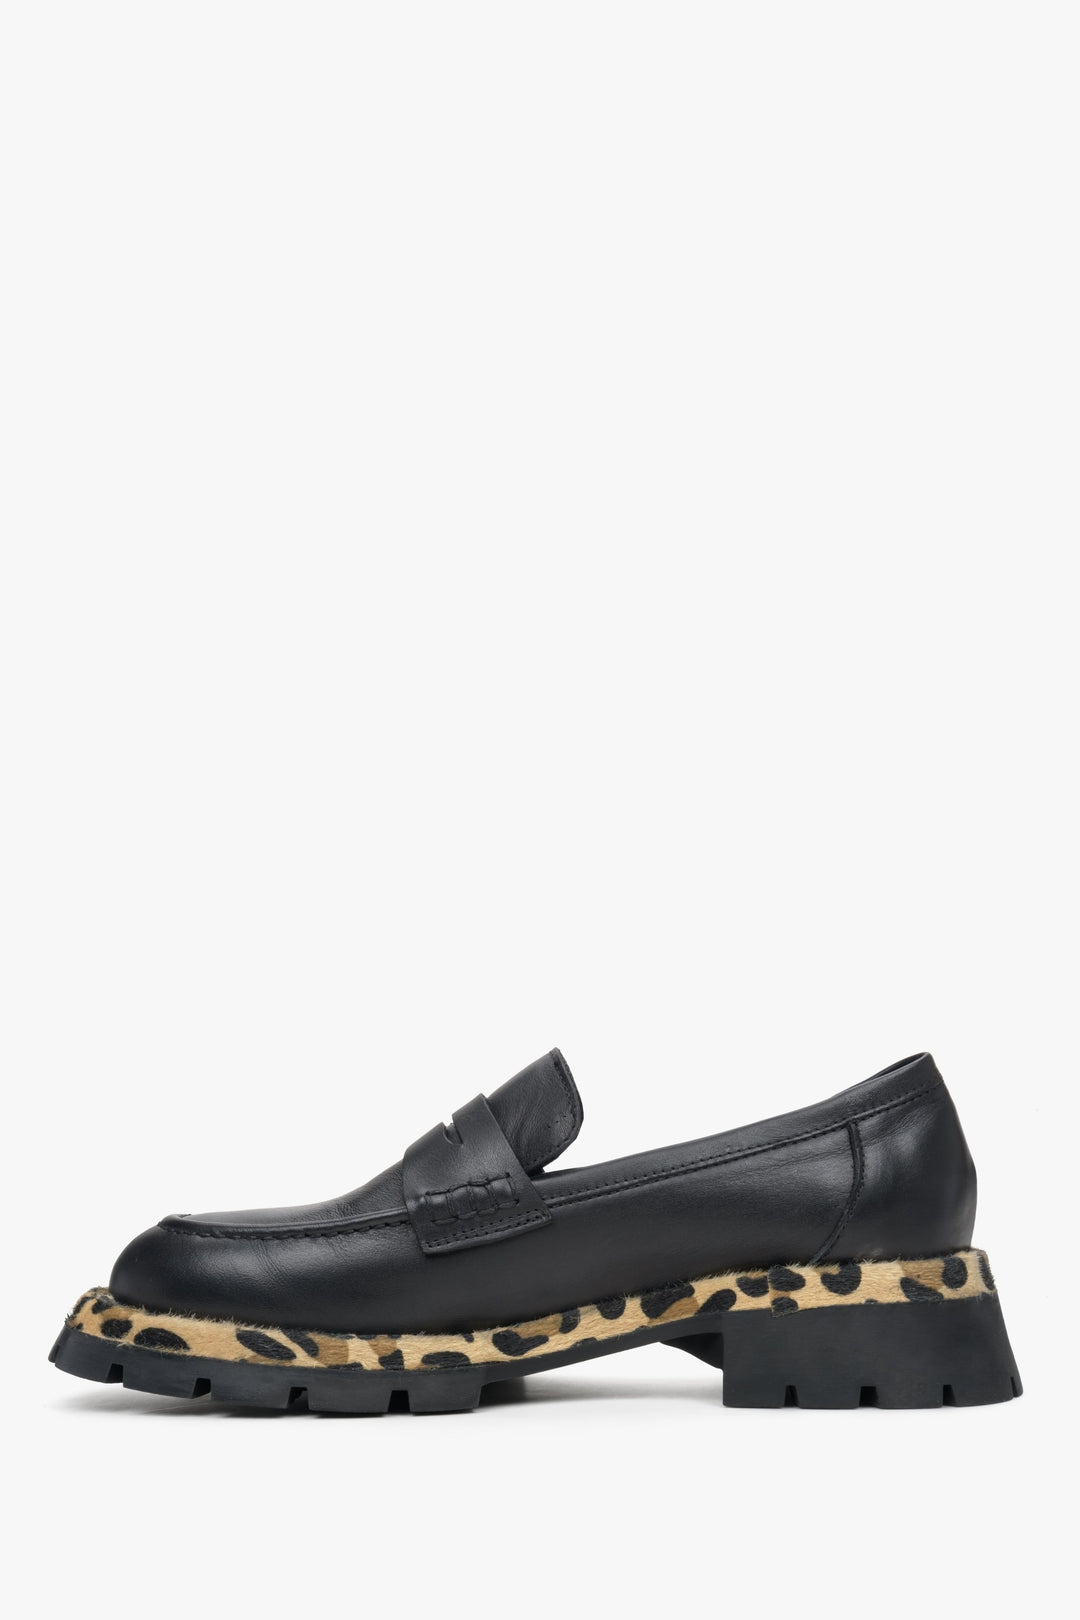 Women's black leather moccasins with an animal print pattern by Estro - shoe profile.